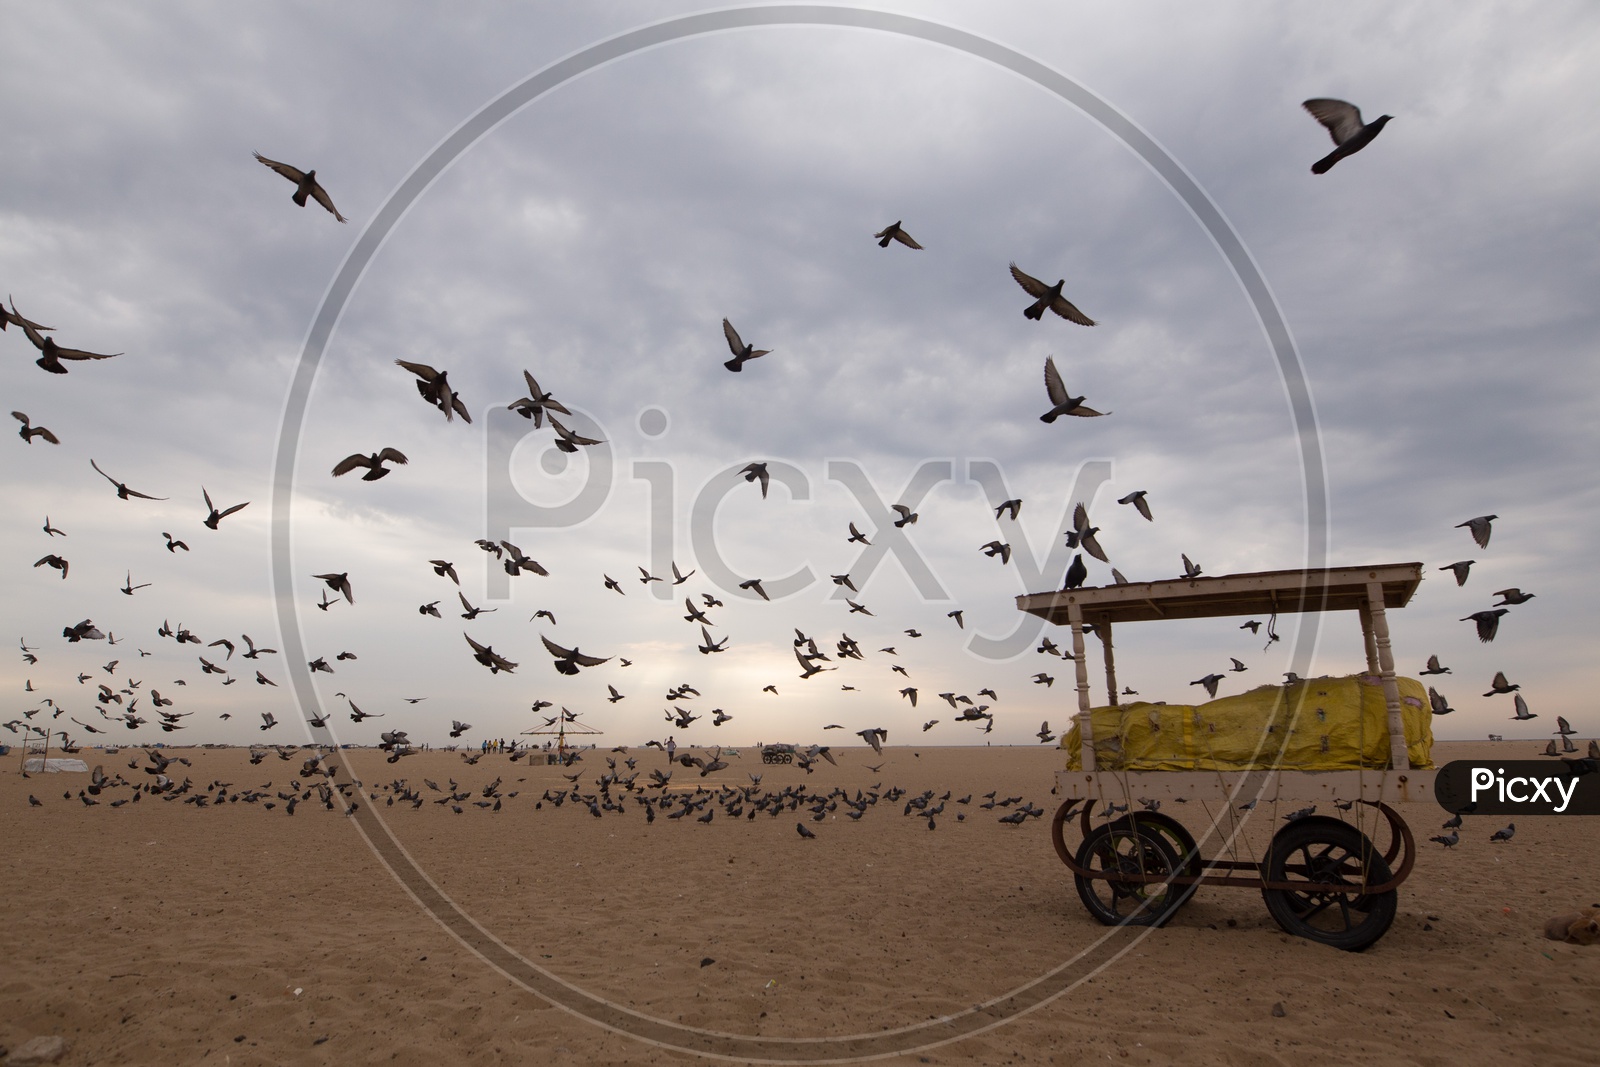 Composition Shot Of  A Vendor Stall In a Beach With A Group Of Pigeons  Flying